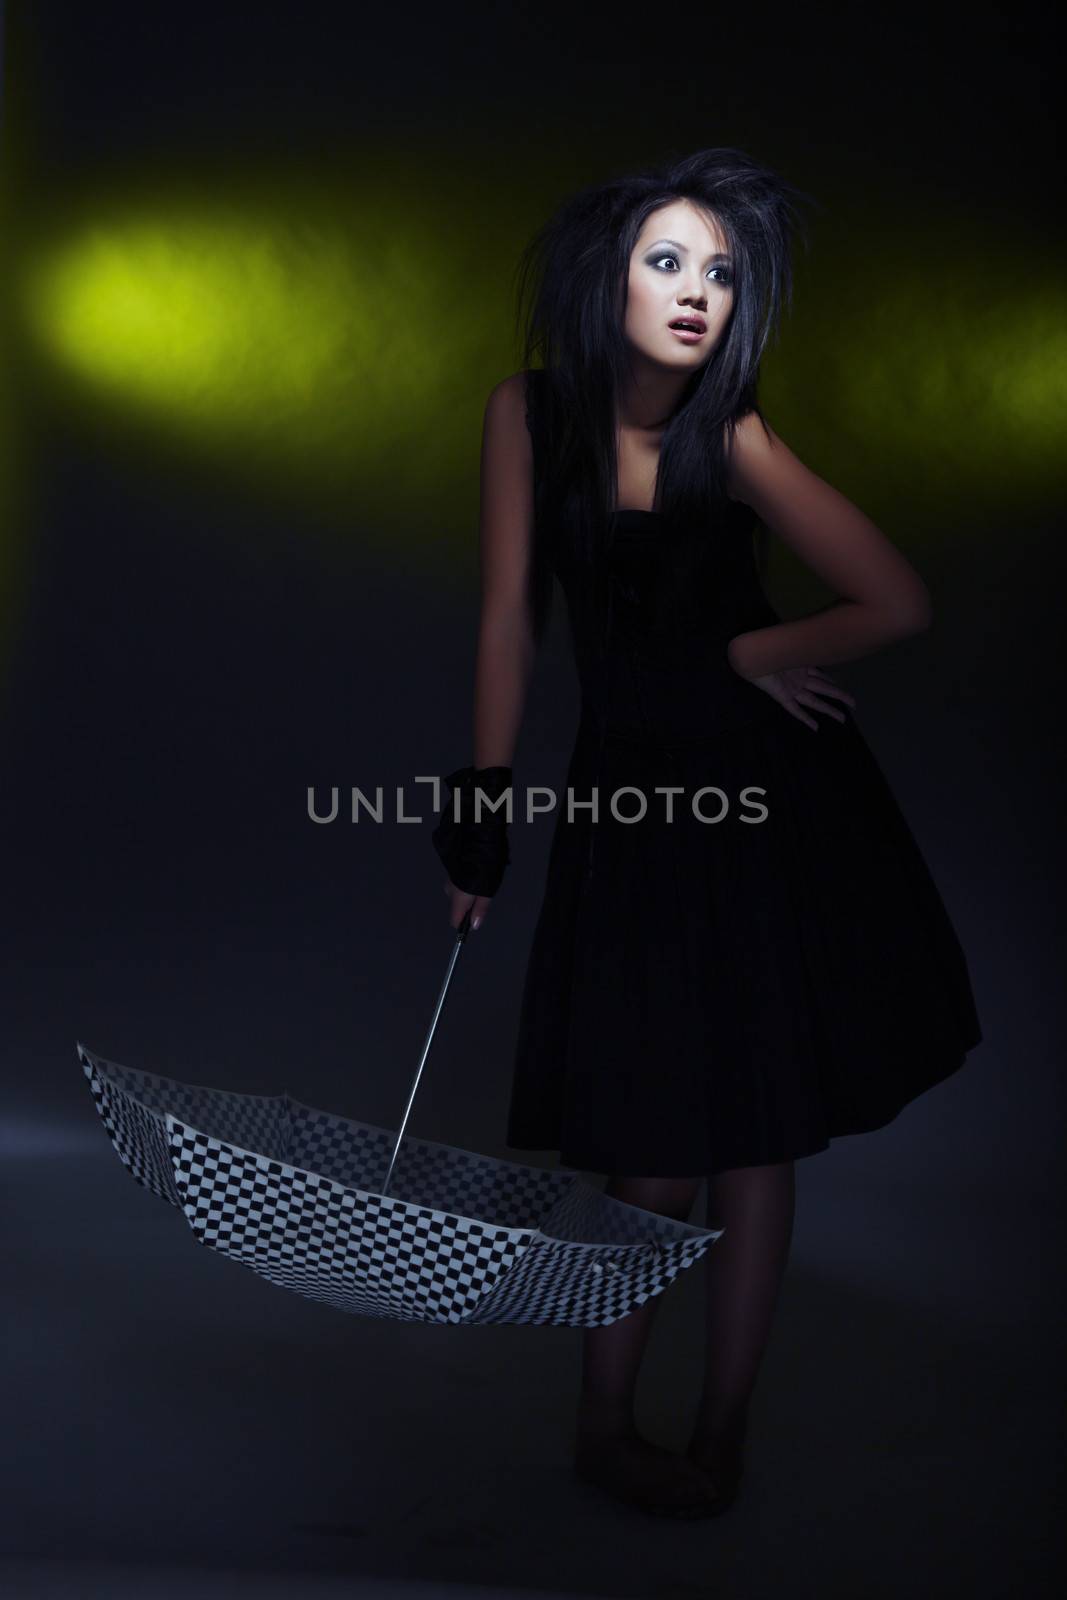 Brunette lady holding umbrella on a dark background. Artistic darkness and colors added